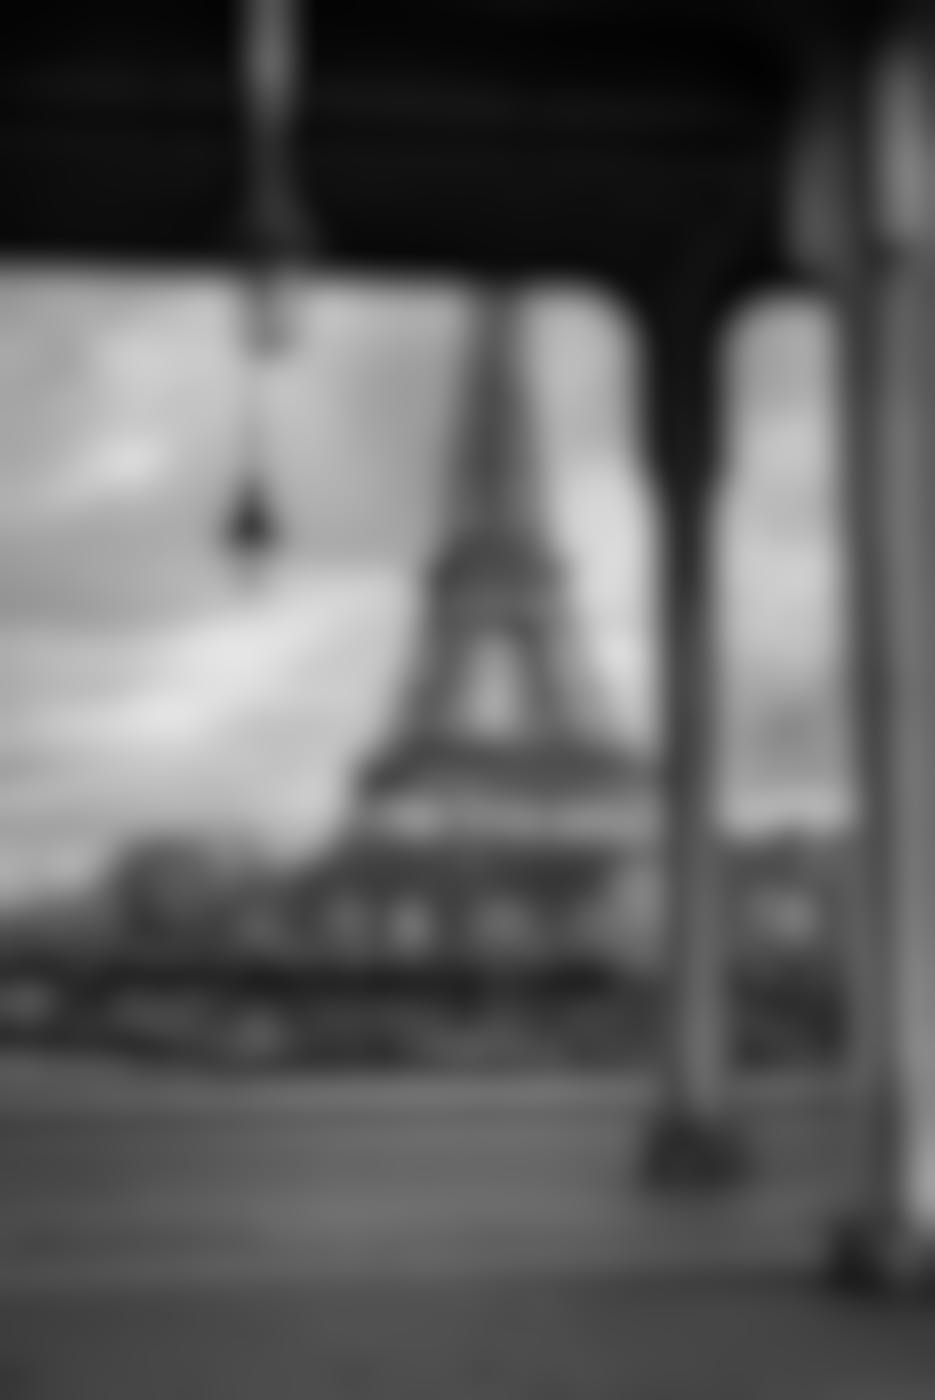  grey scale image of the Eiffel Tower